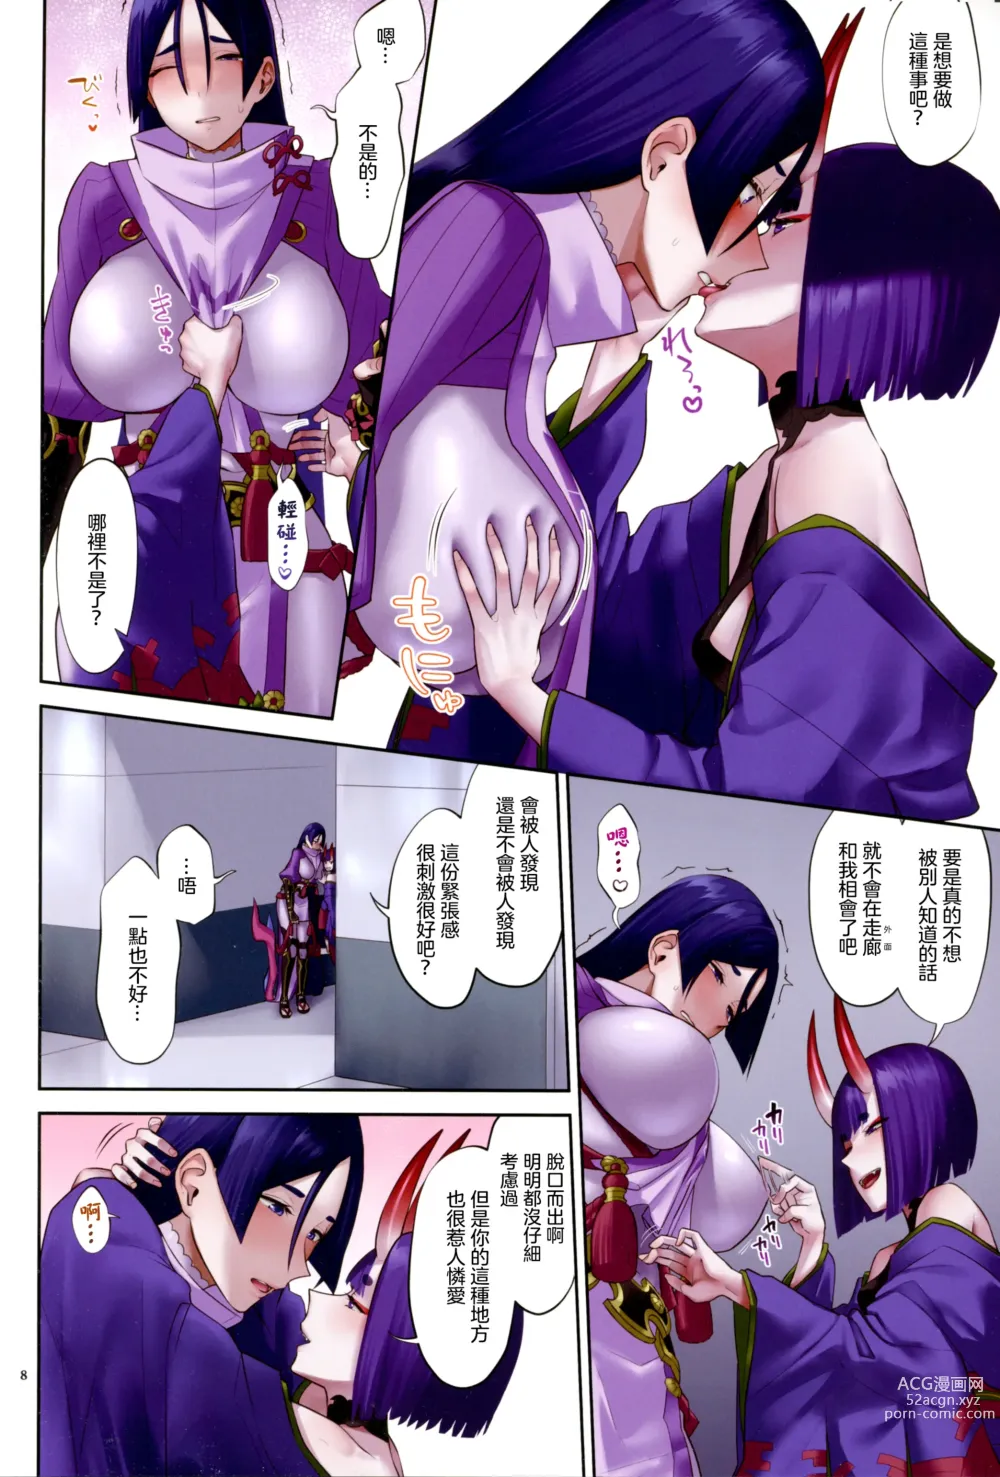 Page 9 of doujinshi 我家的酒賴恩愛過頭了